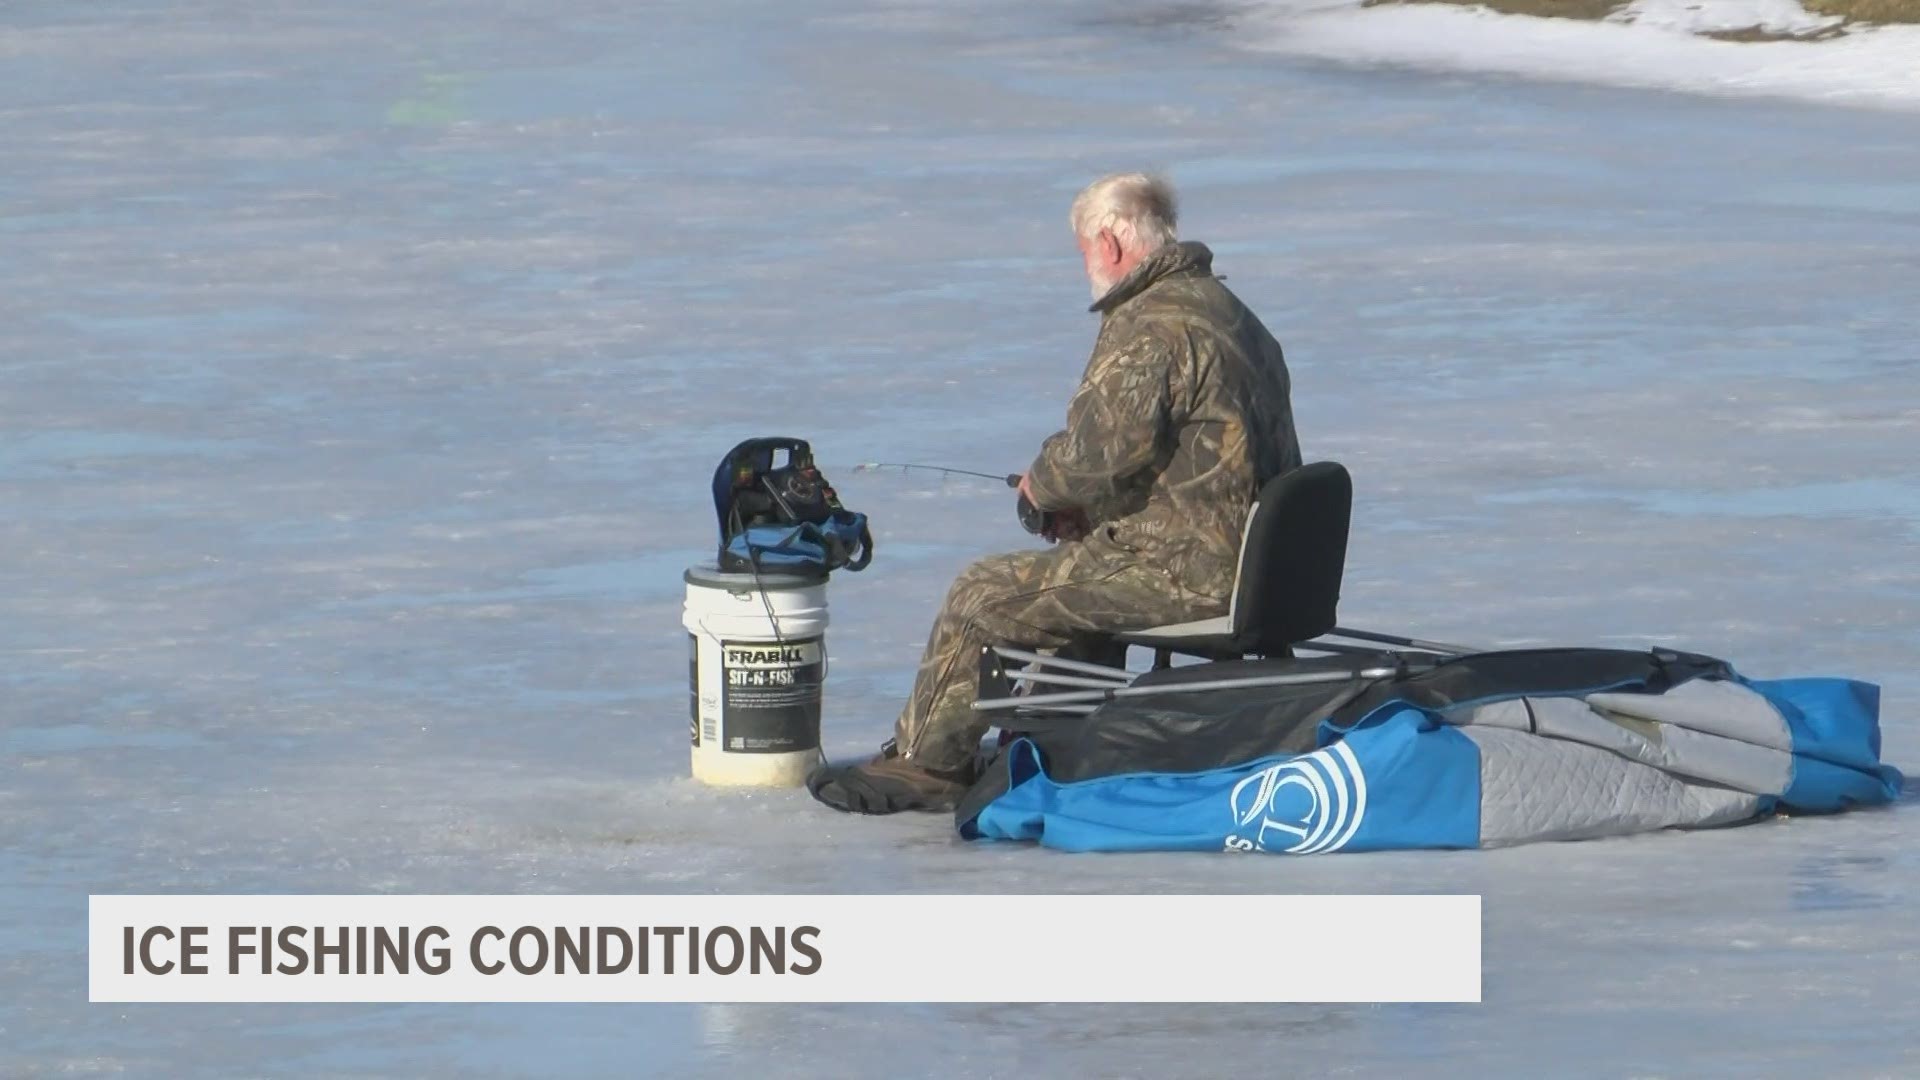 A metro man said he's gone ice fishing fewer times this winter season compared to past ones because he's not always comfortable with the thickness of the ice.